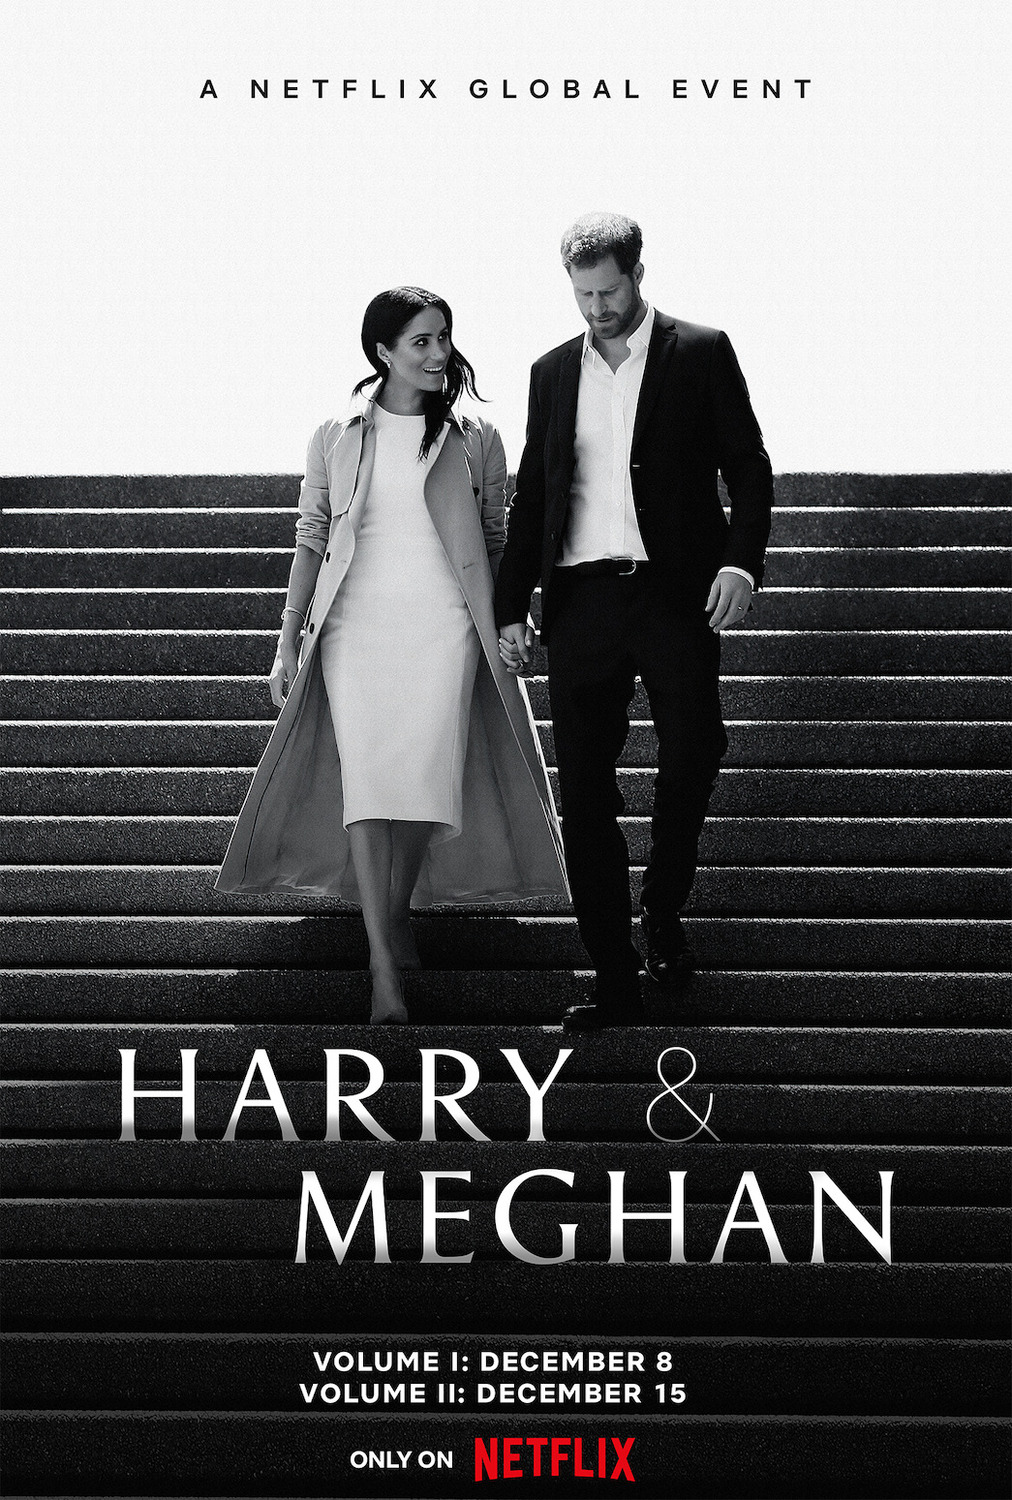 Extra Large TV Poster Image for Harry & Meghan 